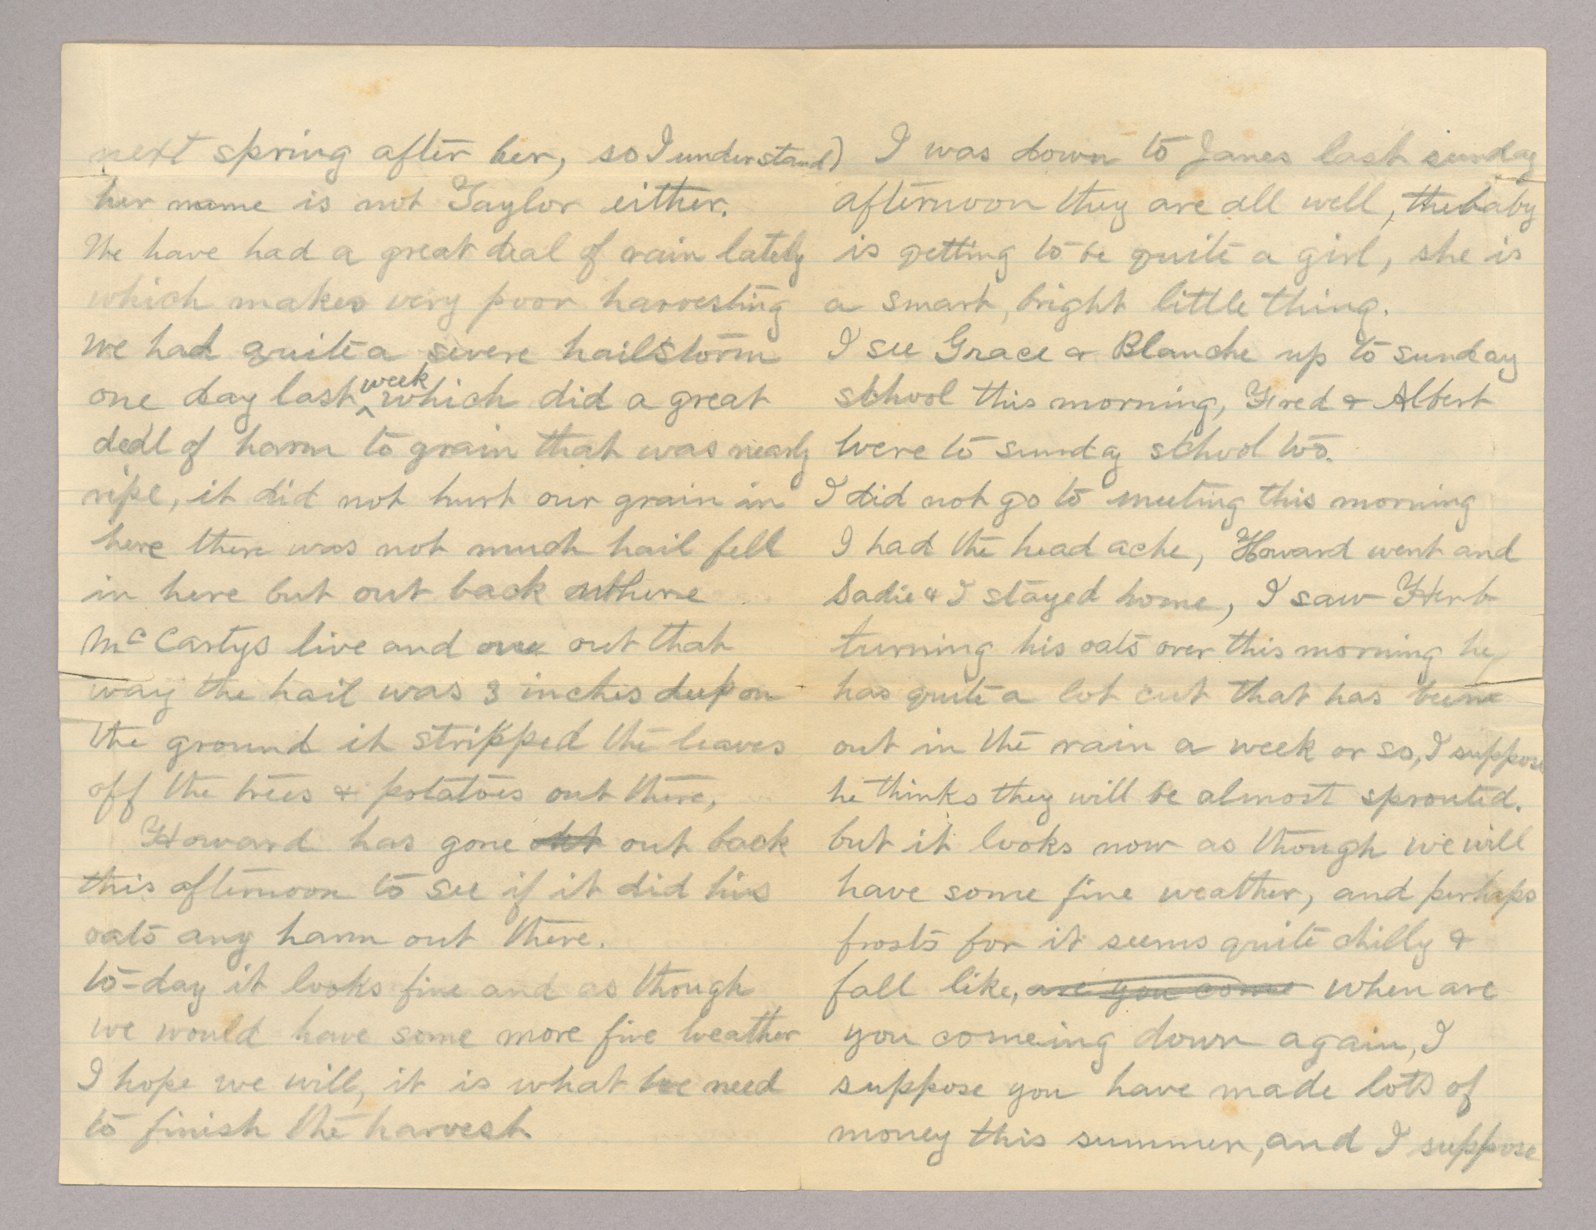 Letter. "Ruth" [Ruth Brownlee ?], South Newbridge, New Brunswick, to John [E.] Brownlee Jr., Costello, Pennsylvania, Pages 2-3